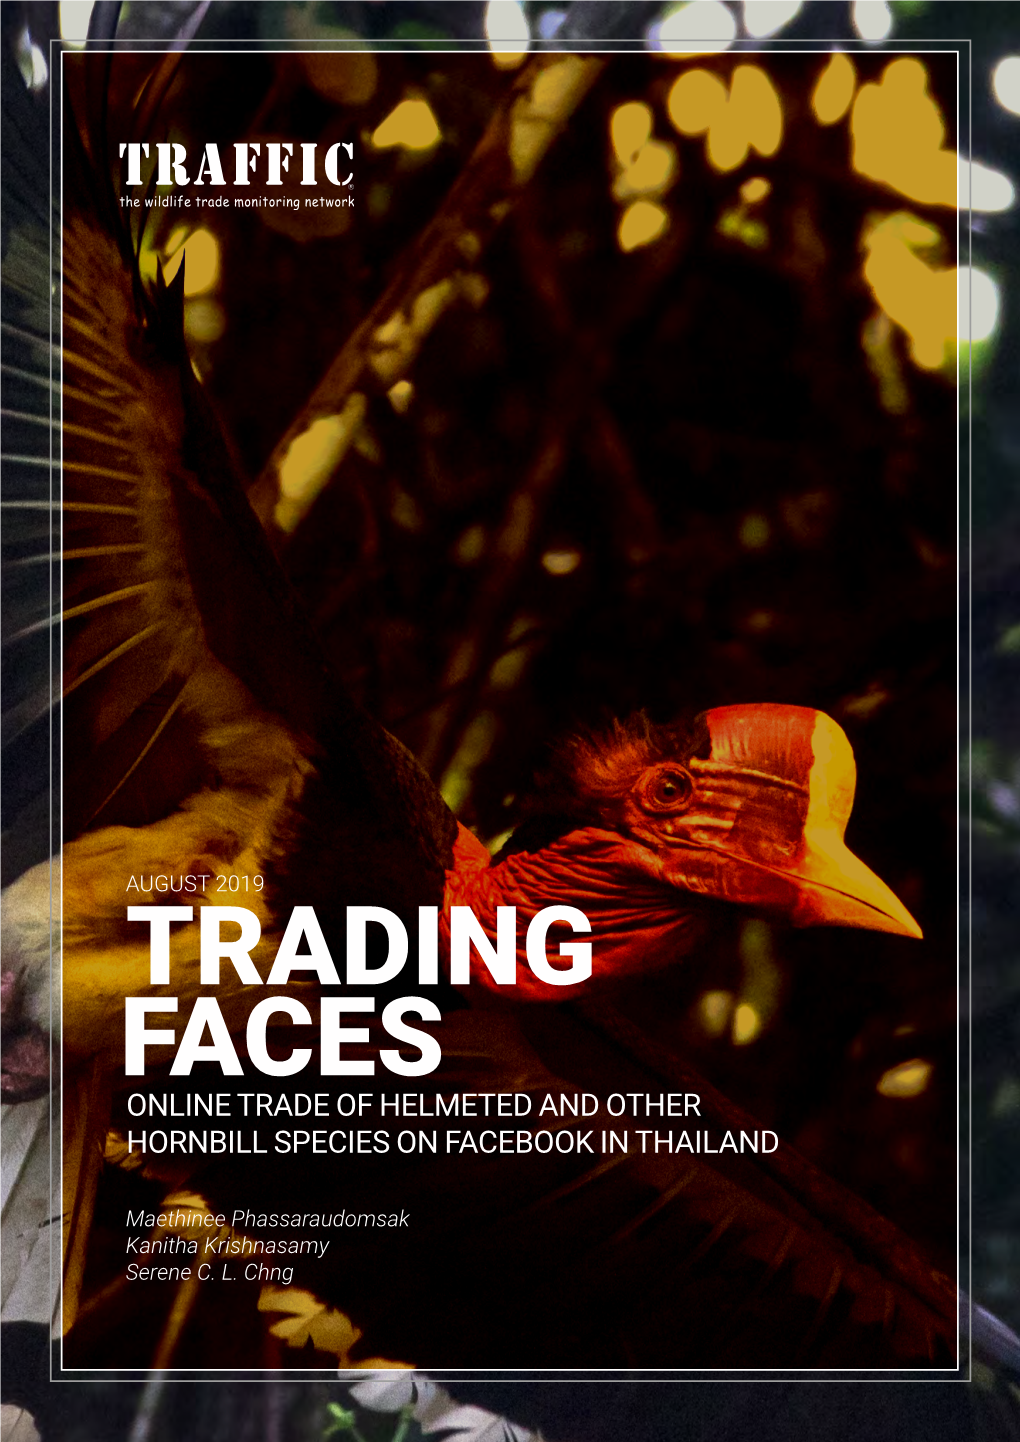 Trading Faces Online Trade of Helmeted and Other Hornbill Species on Facebook in Thailand